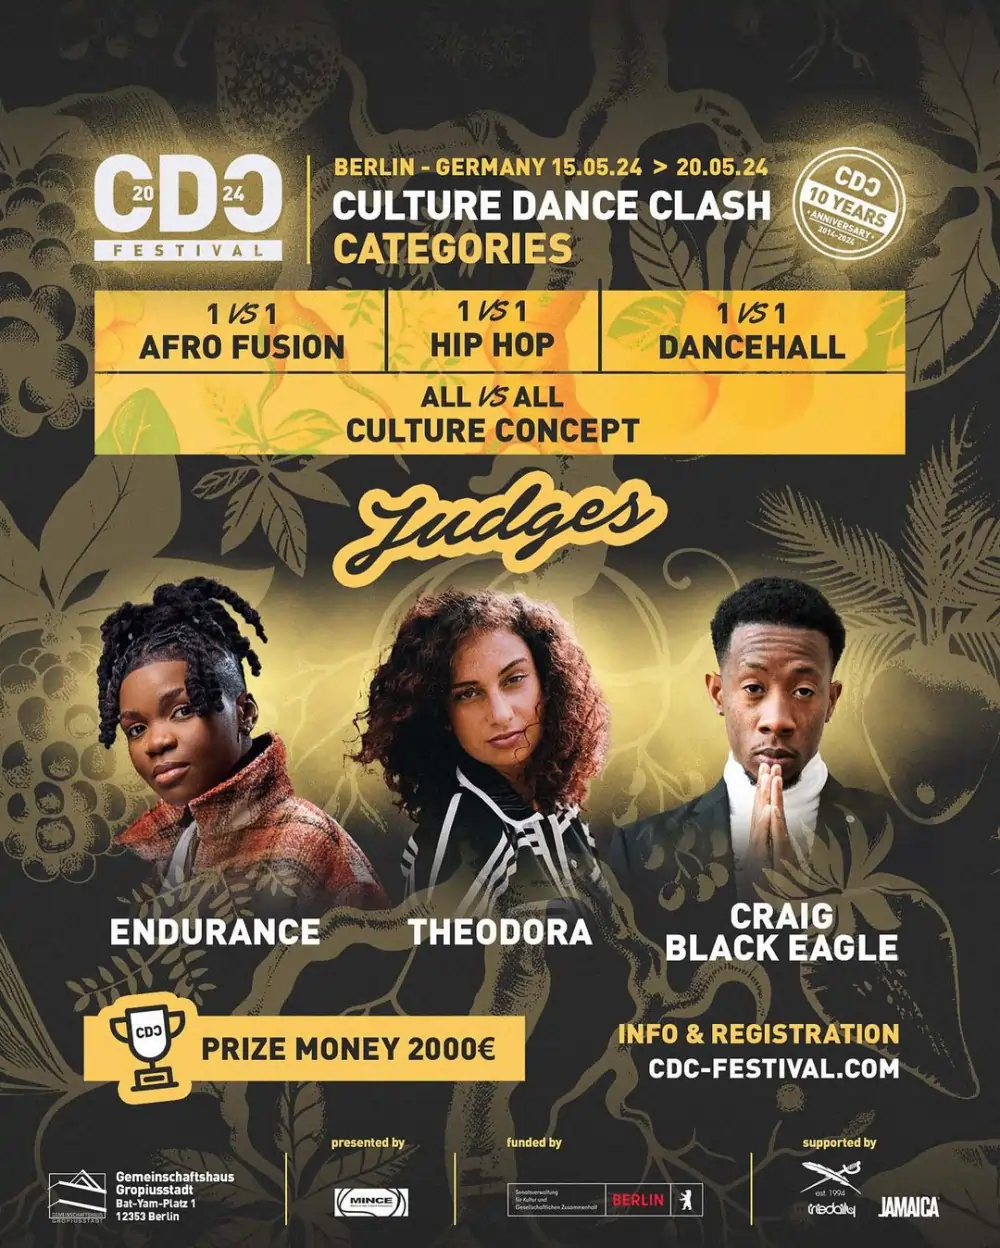 Poster for Culture Dance Clash Festival 2024 in Berlin, showcasing categories: Afro Fusion, Hip Hop, Dancehall, All Styles - All Culture Concept. Judges: Endurance, Theodora, Craig Black Eagle. Prize: €2000. This image is the featured image for the article "Poster for Culture Dance Clash Festival 2024 in Berlin, showcasing categories: Afro Fusion, Hip Hop, Dancehall, All Styles - All Culture Concept. Judges: Endurance, Theodora, Craig Black Eagle. Prize: €2000."